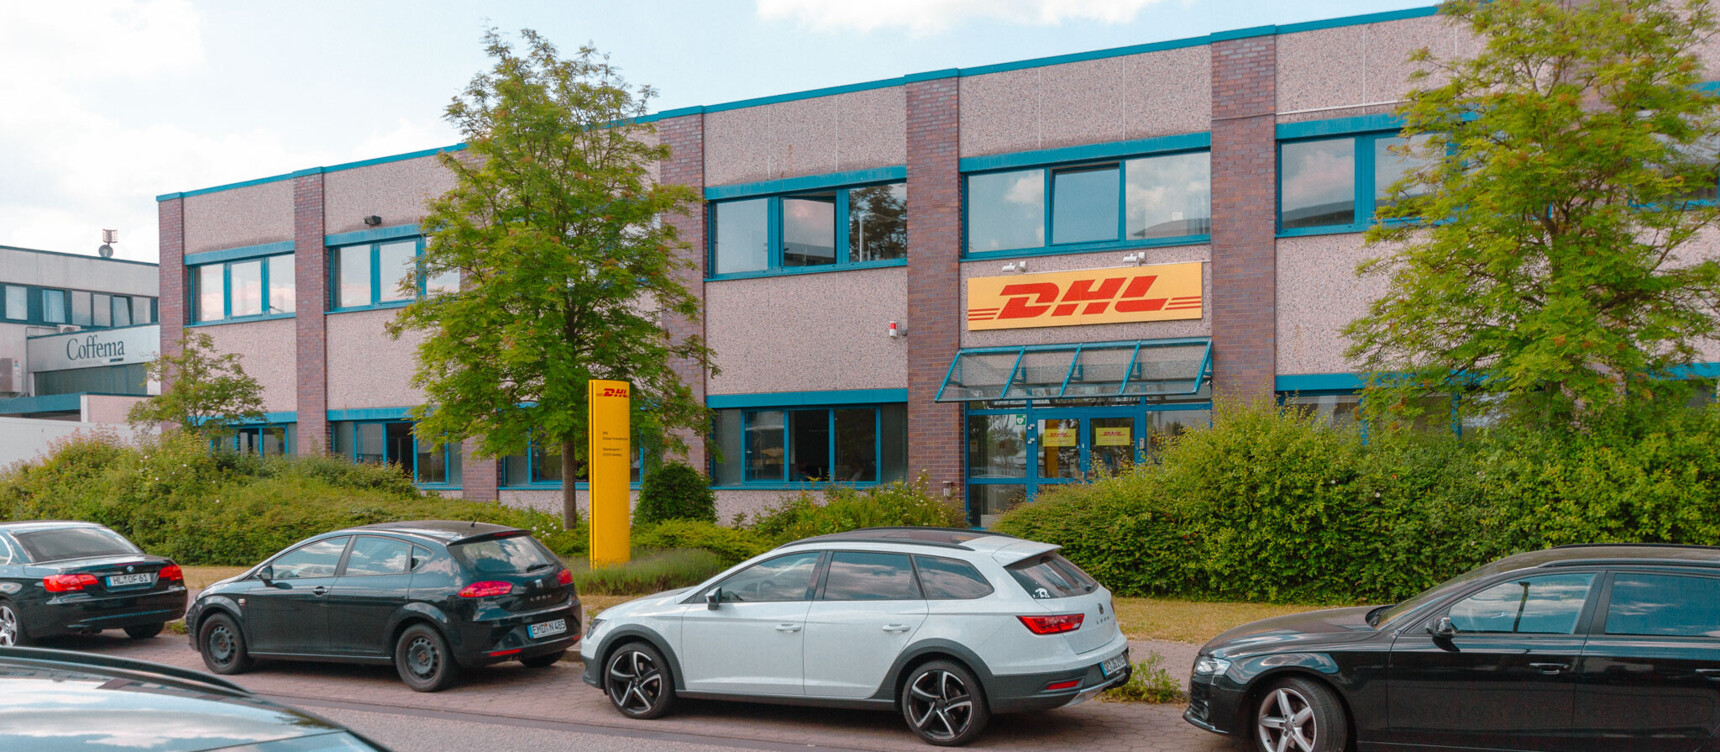 DHL headquarters at the southern airport environment location